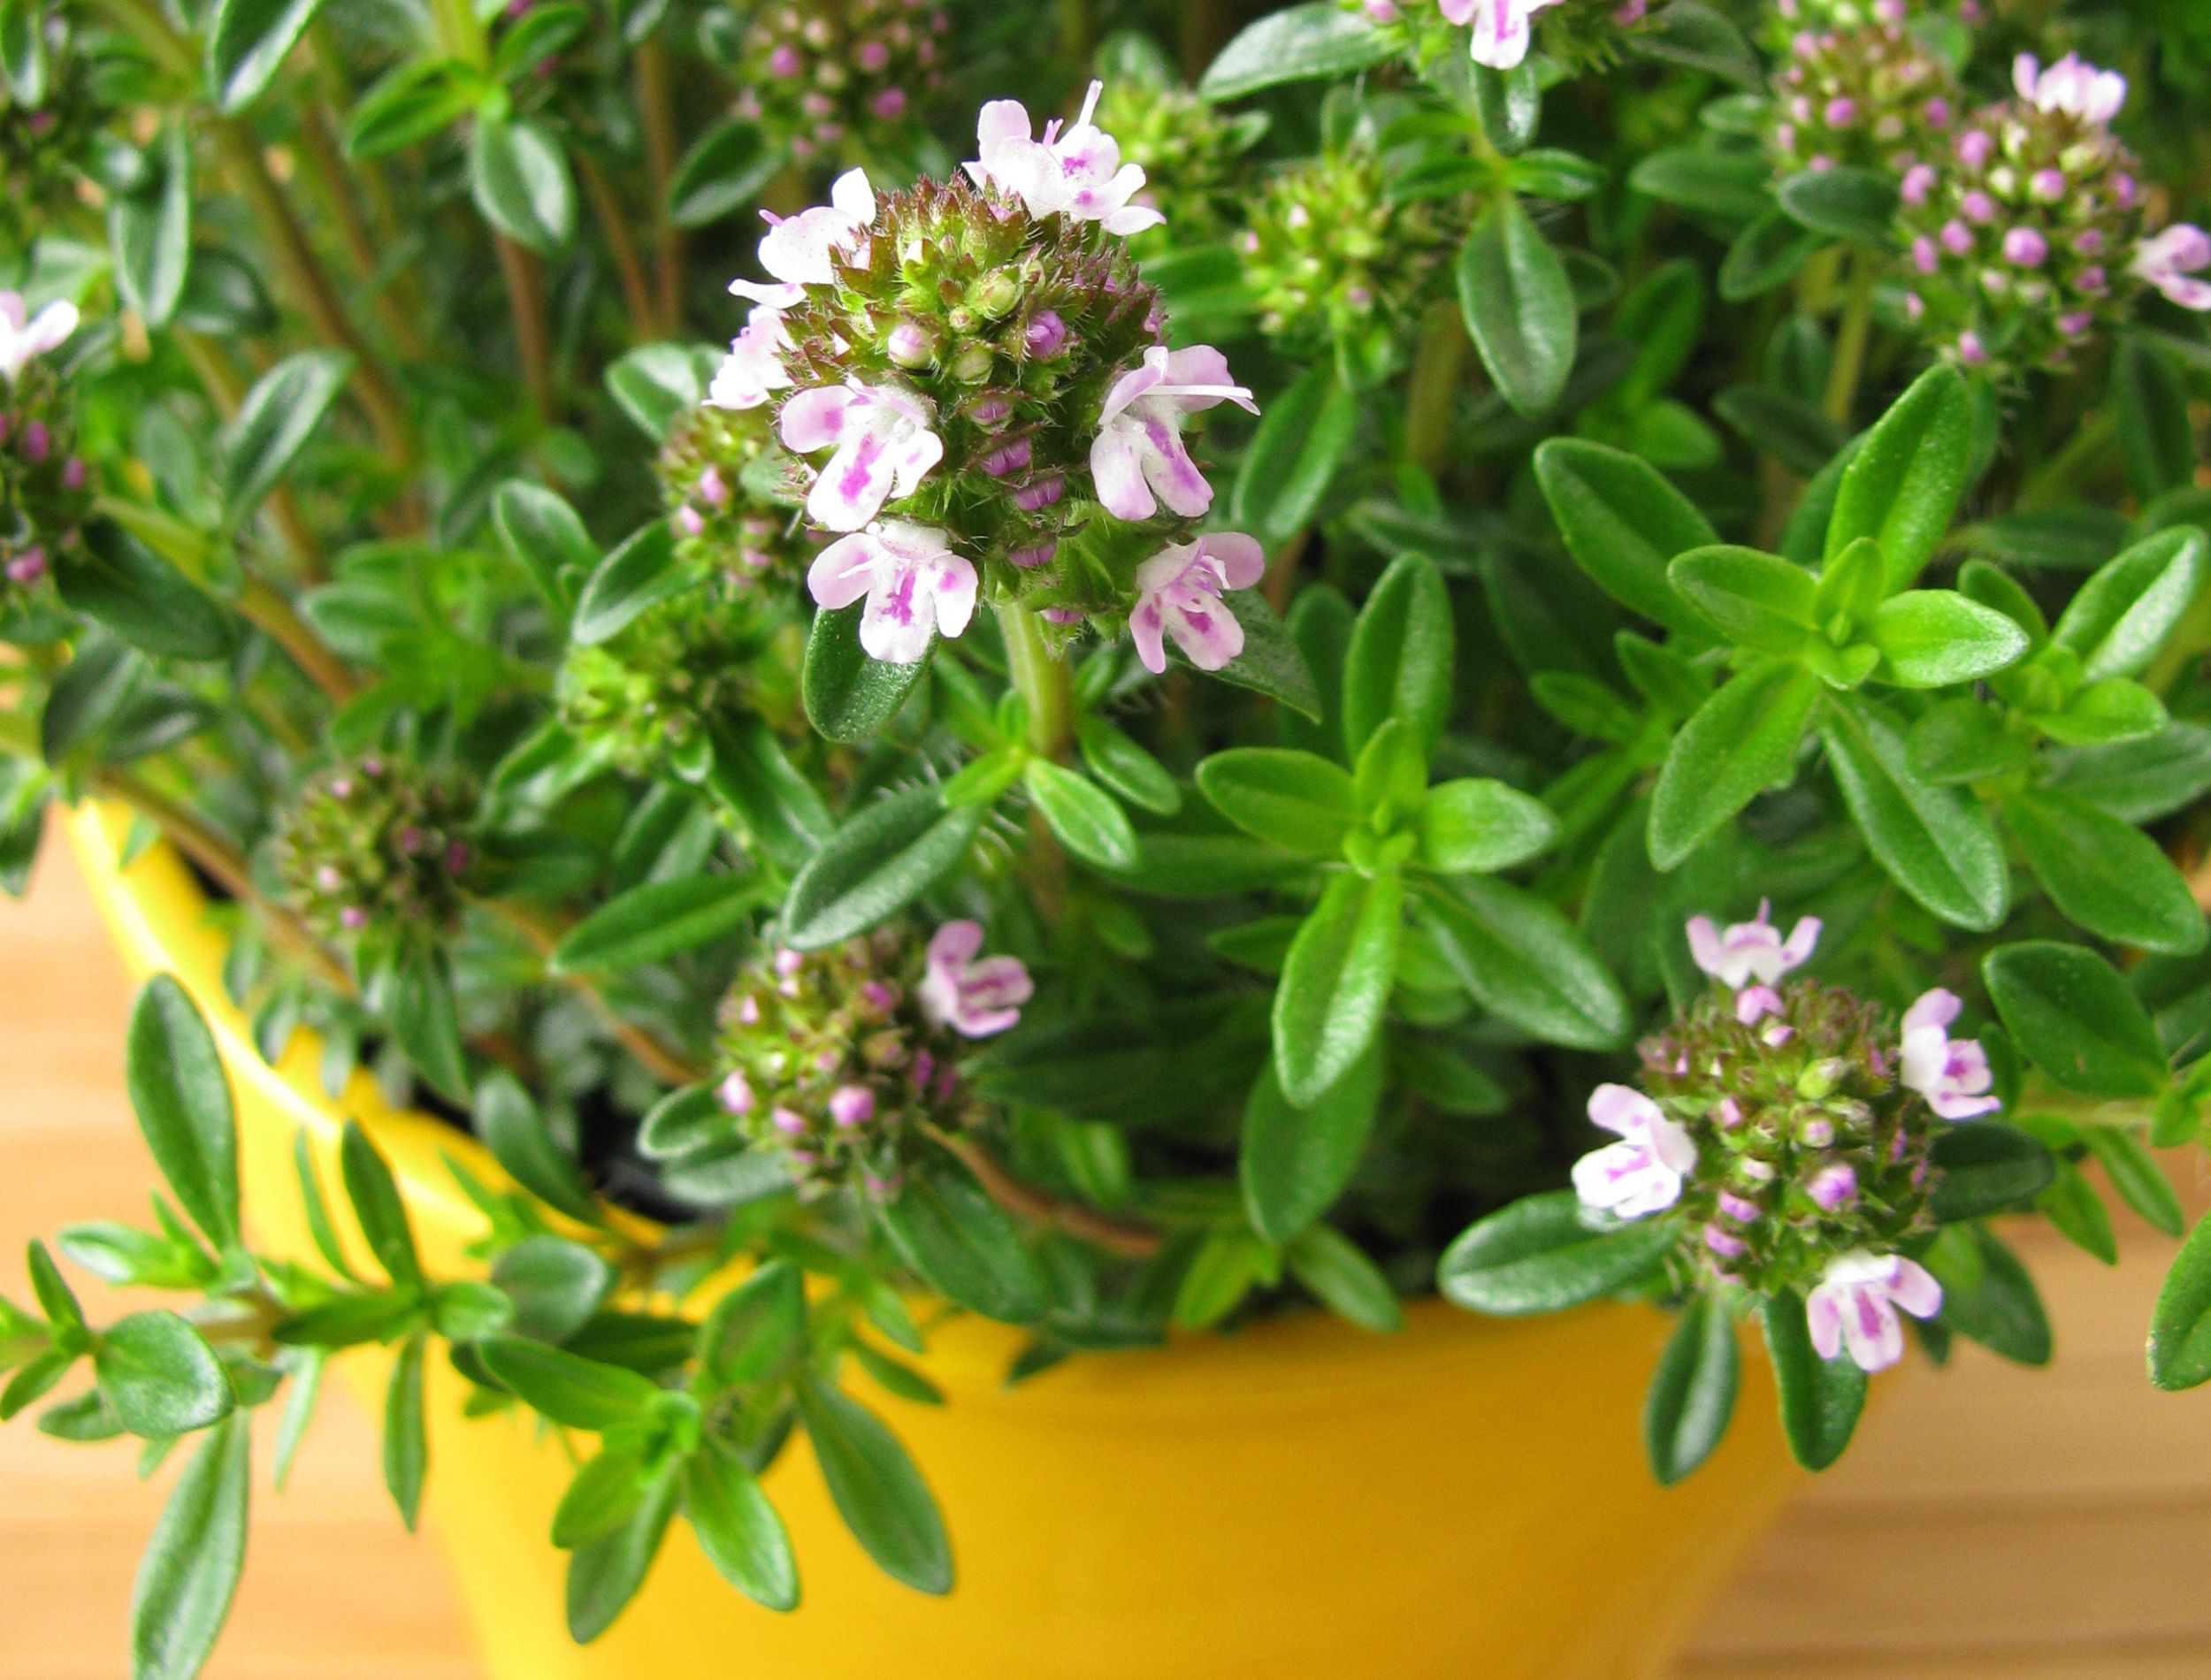 Winter savory in a pot or container for an indoor garden